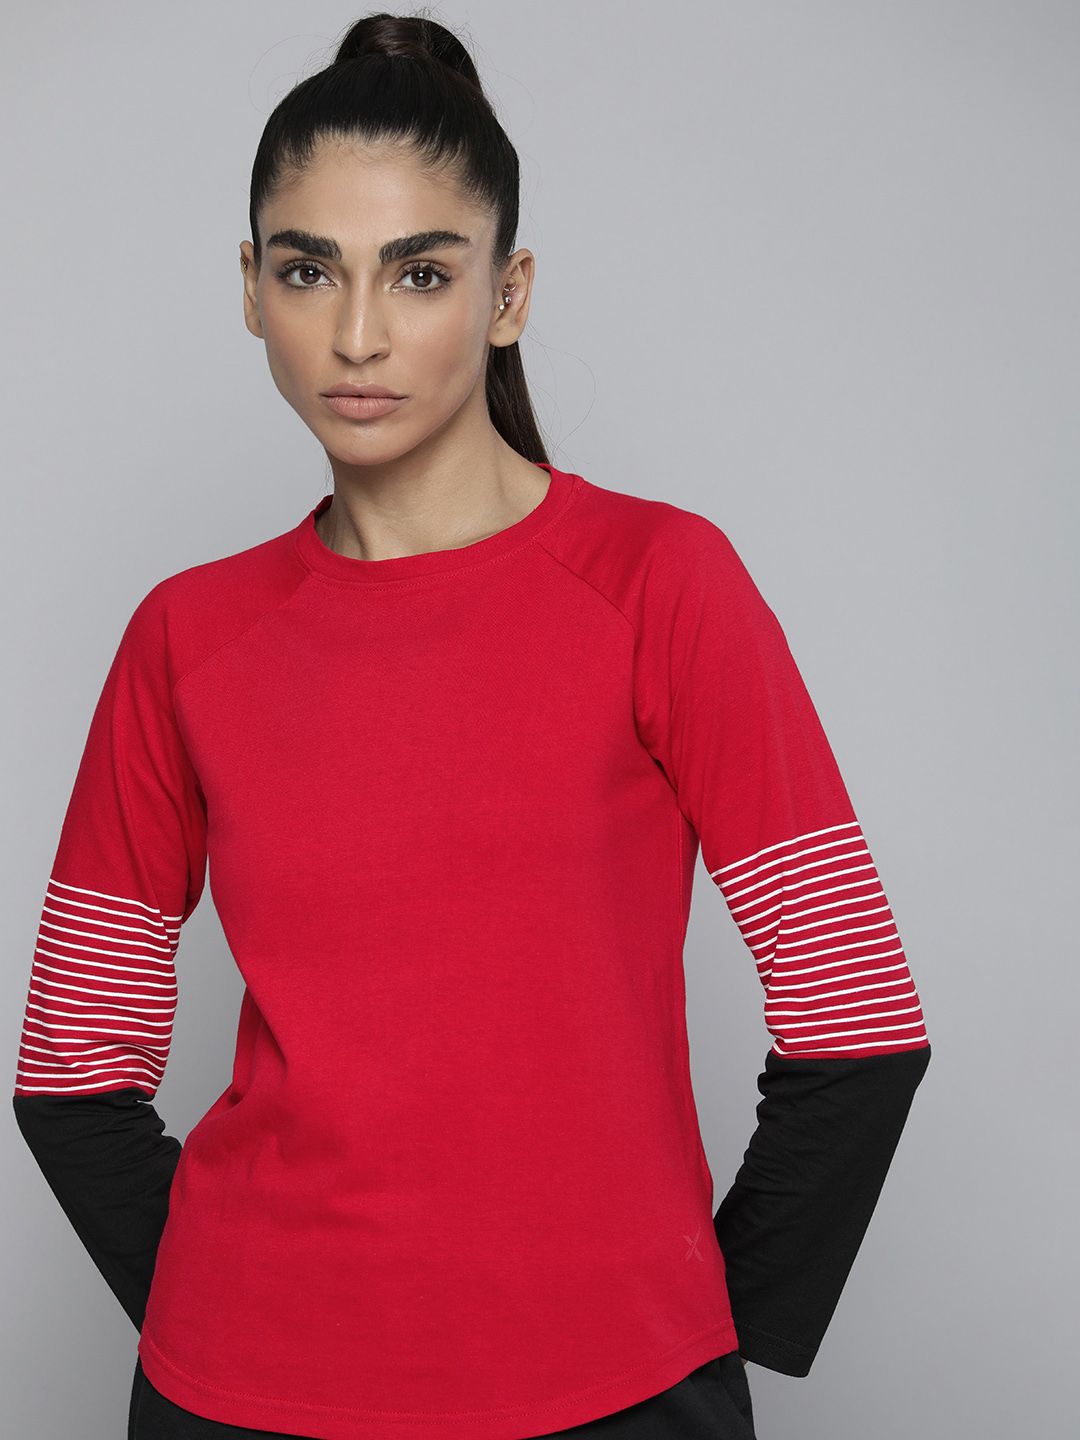 HRX by Hrithik Roshan Women Red & Black Solid T-shirt Price in India